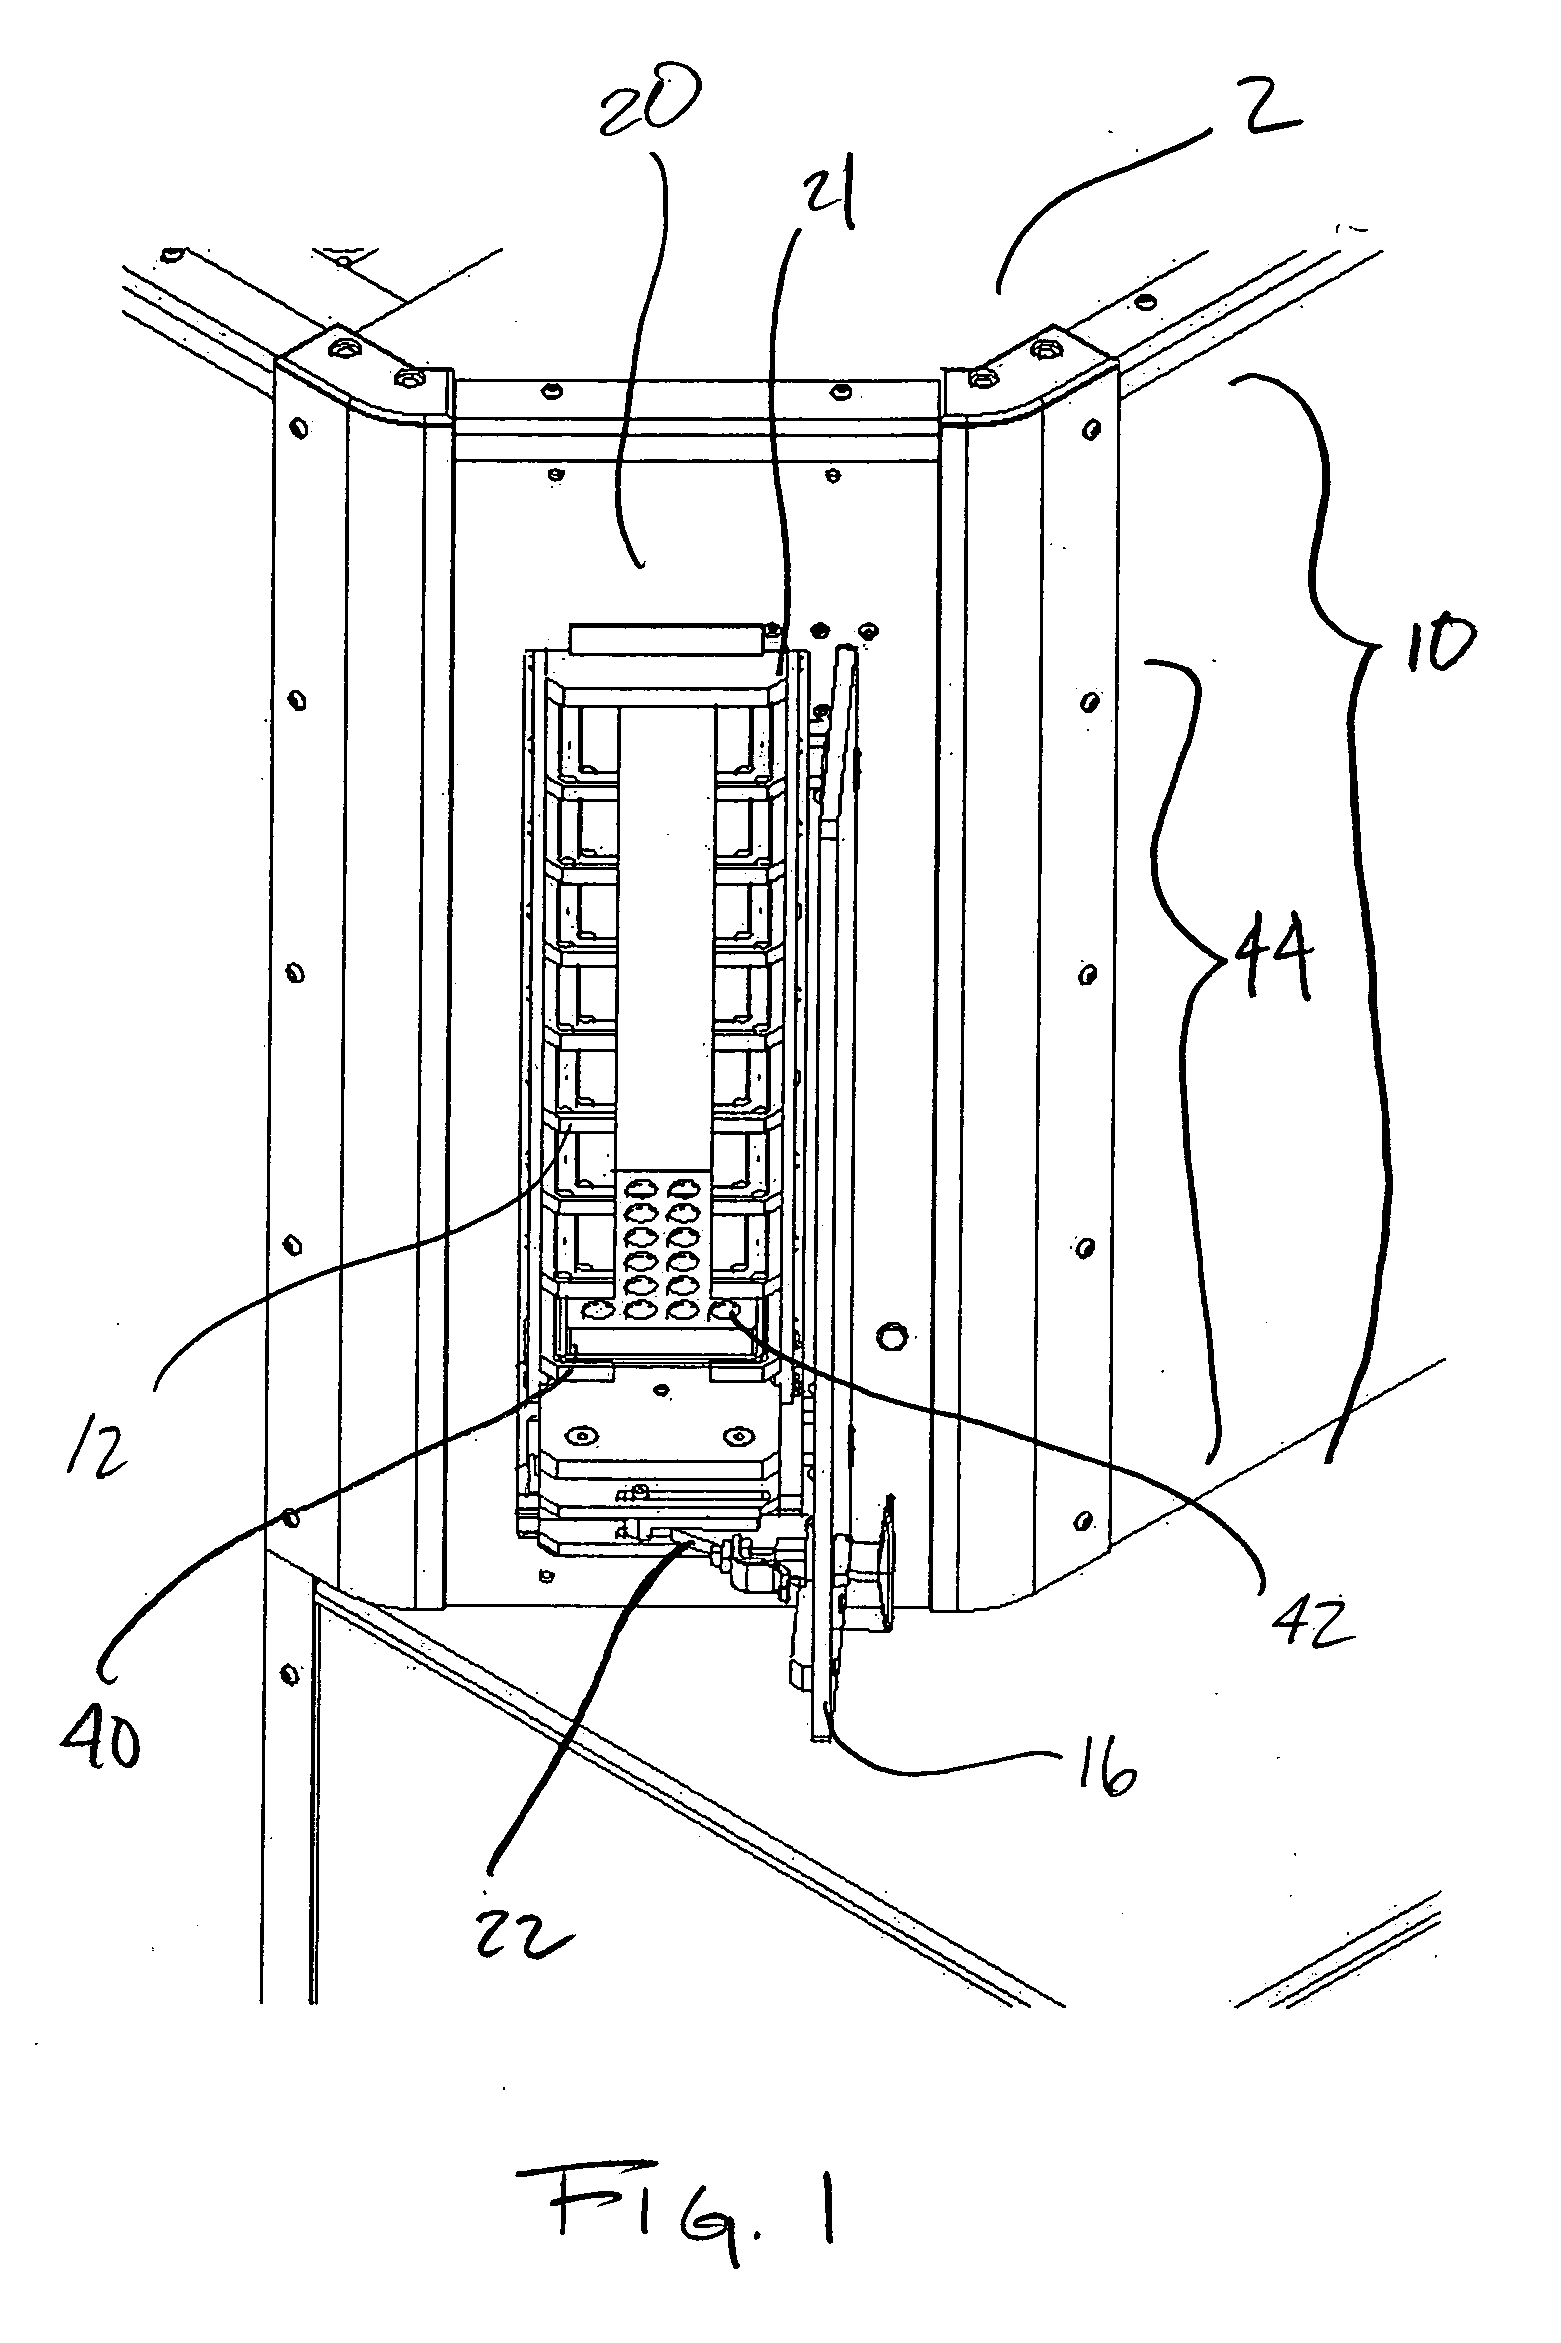 Method and apparatus for accessing a plate storage device